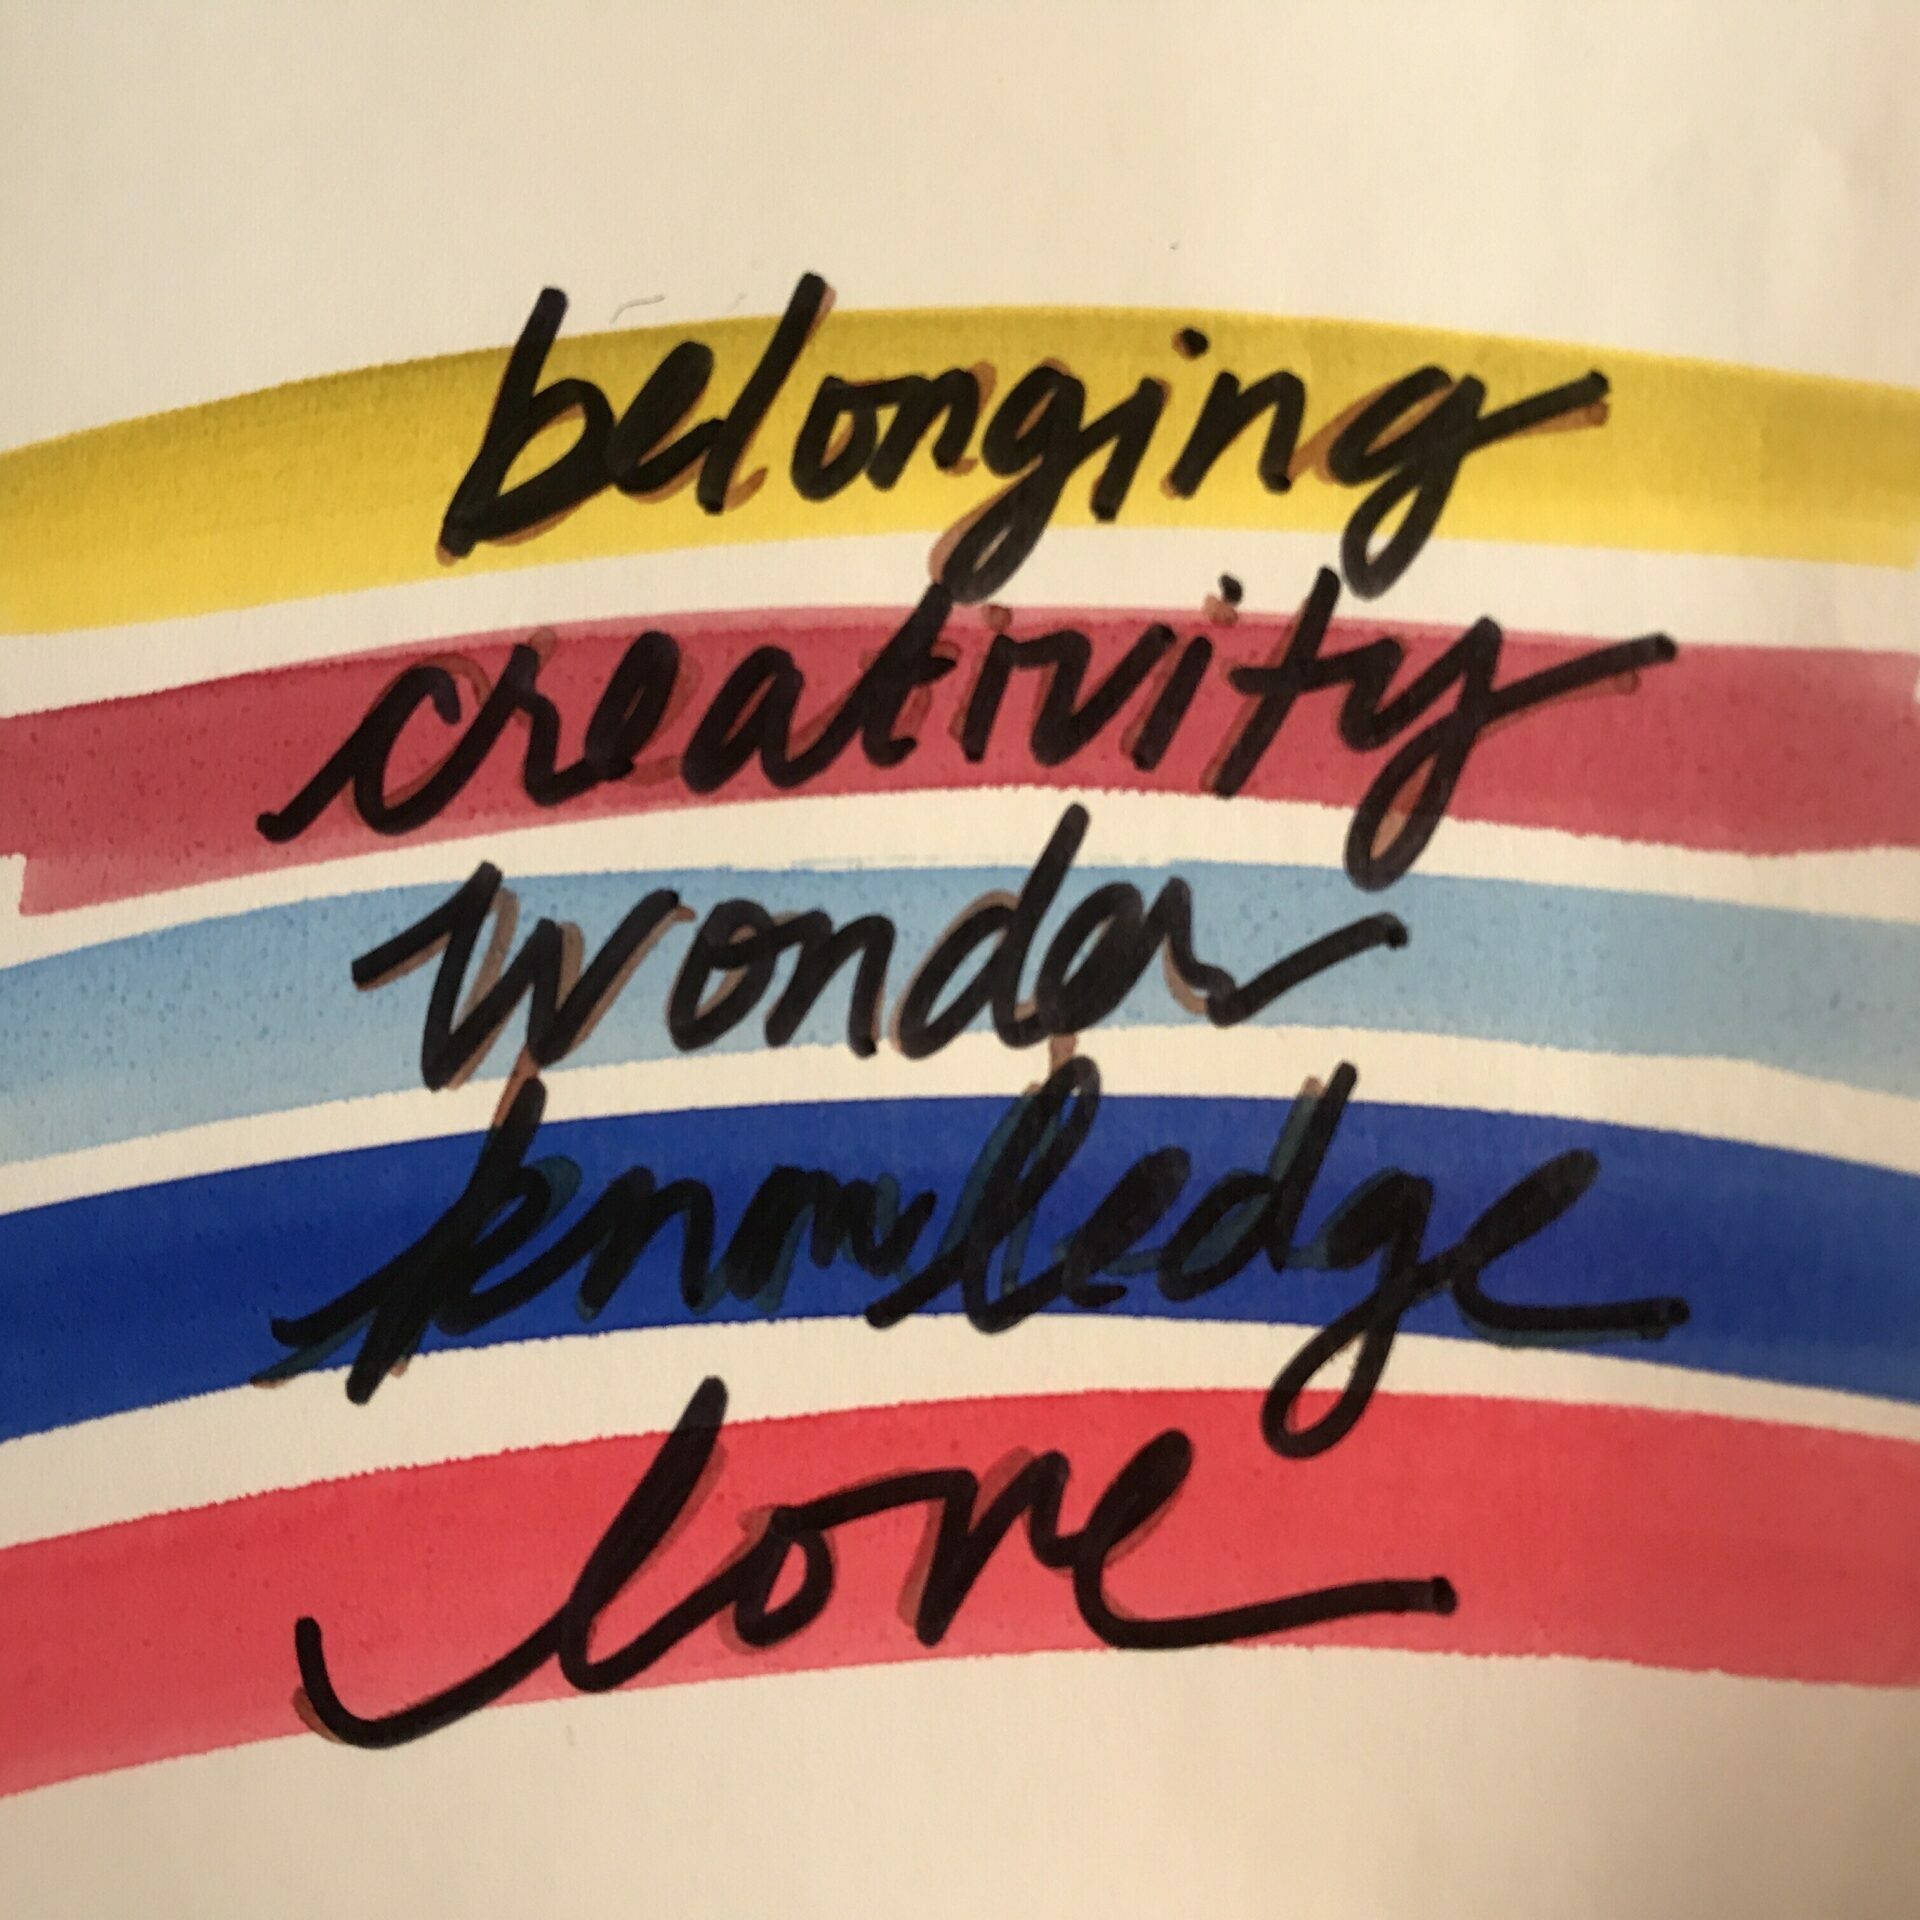 Highlighted words: belonging, creativity, wonder, knowledge and love